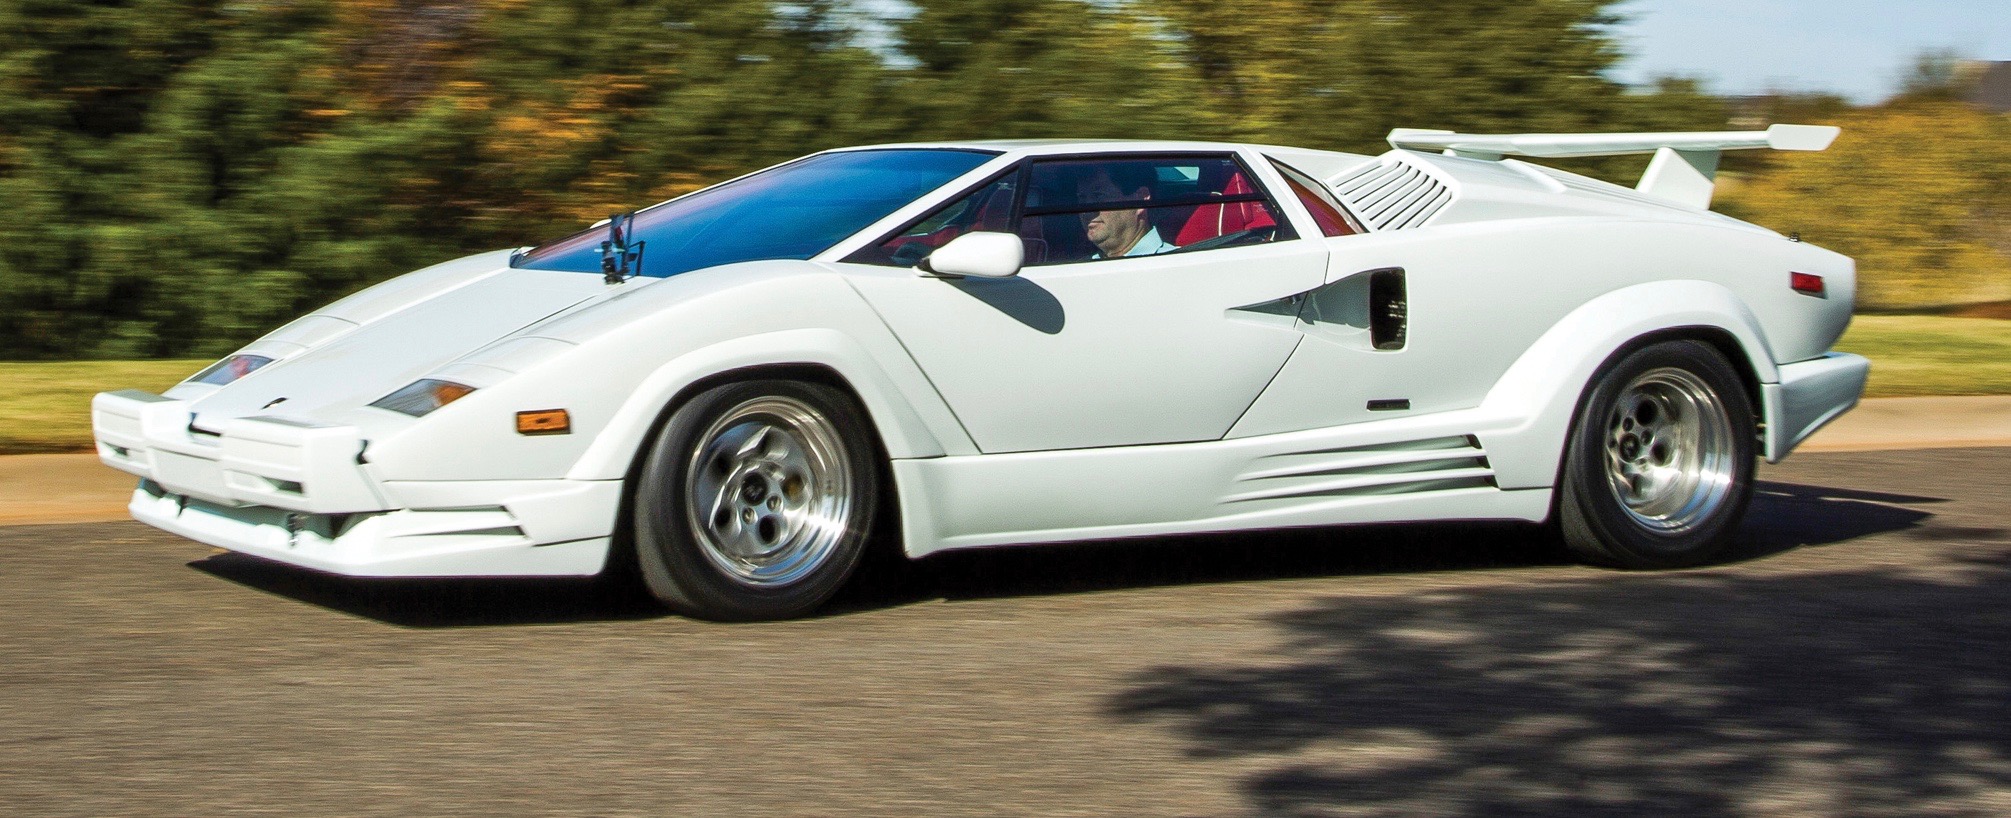 Cars such as the '89 Countach were dream machines for Gen-Xers and early Millennials | RM Sotheby's photo